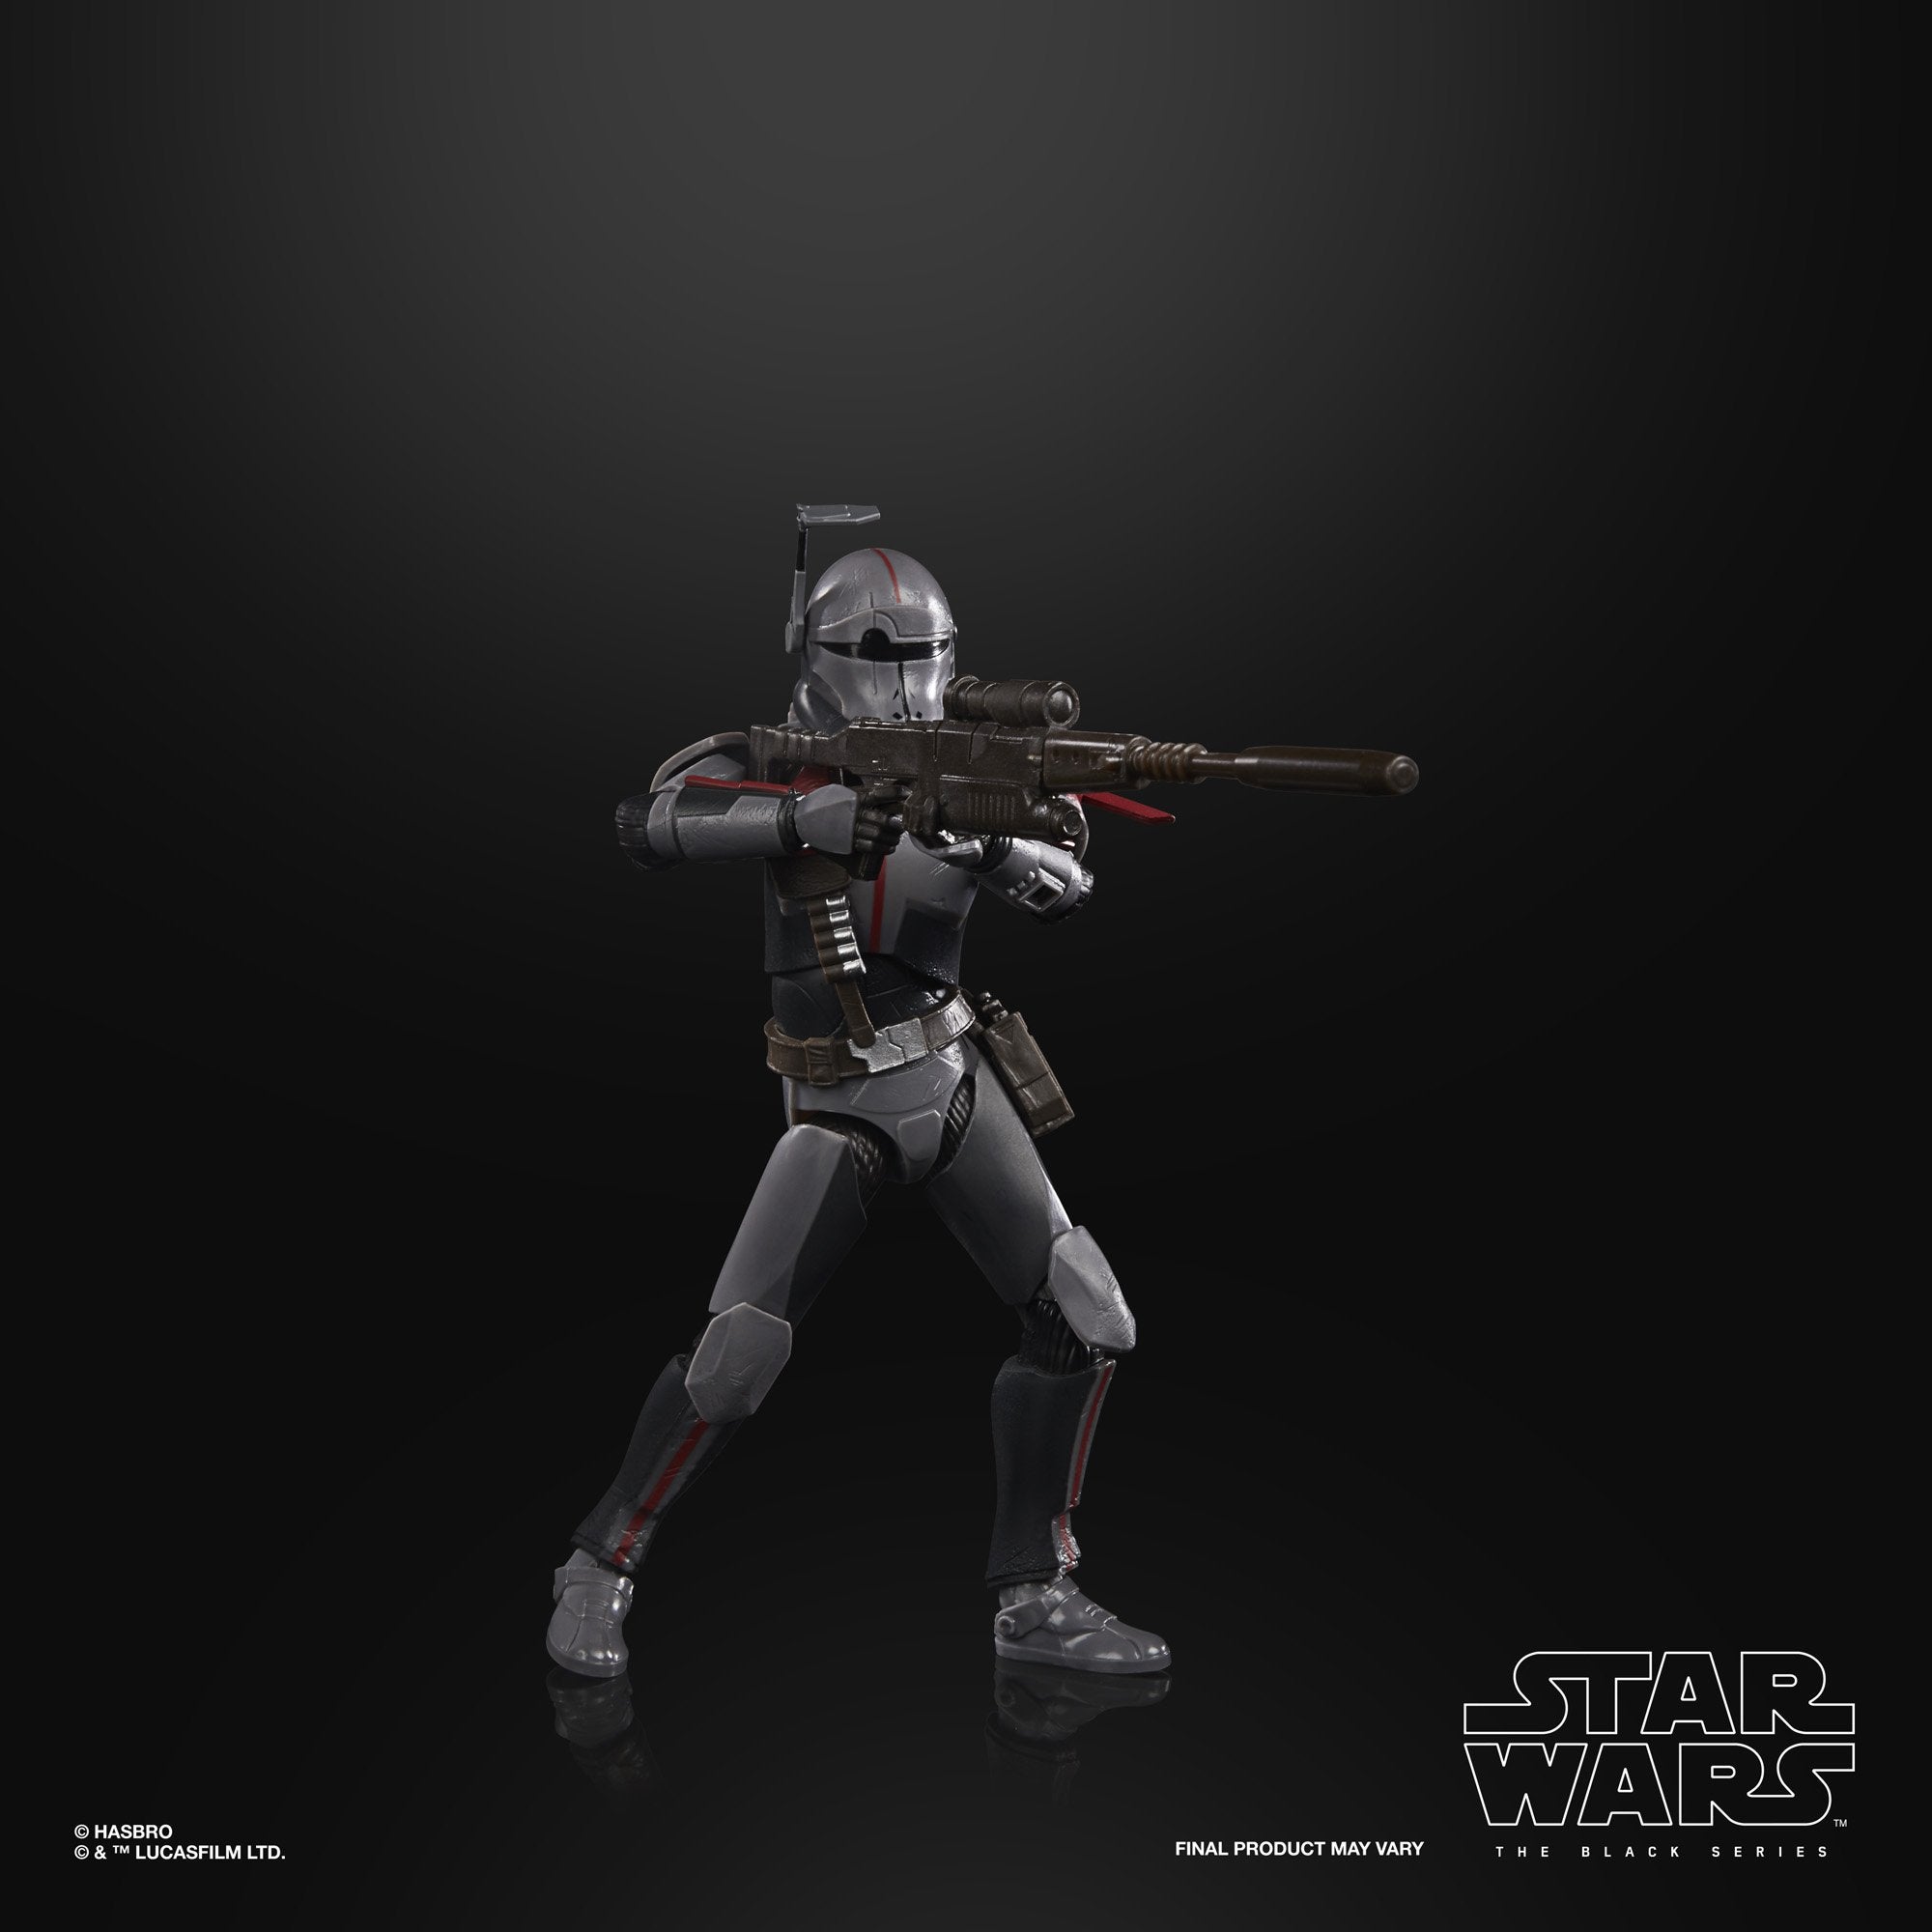 Hasbro Star Wars Black Series The Bad Batch #09 Crosshair (Imperial) 6 Inch Action Figure